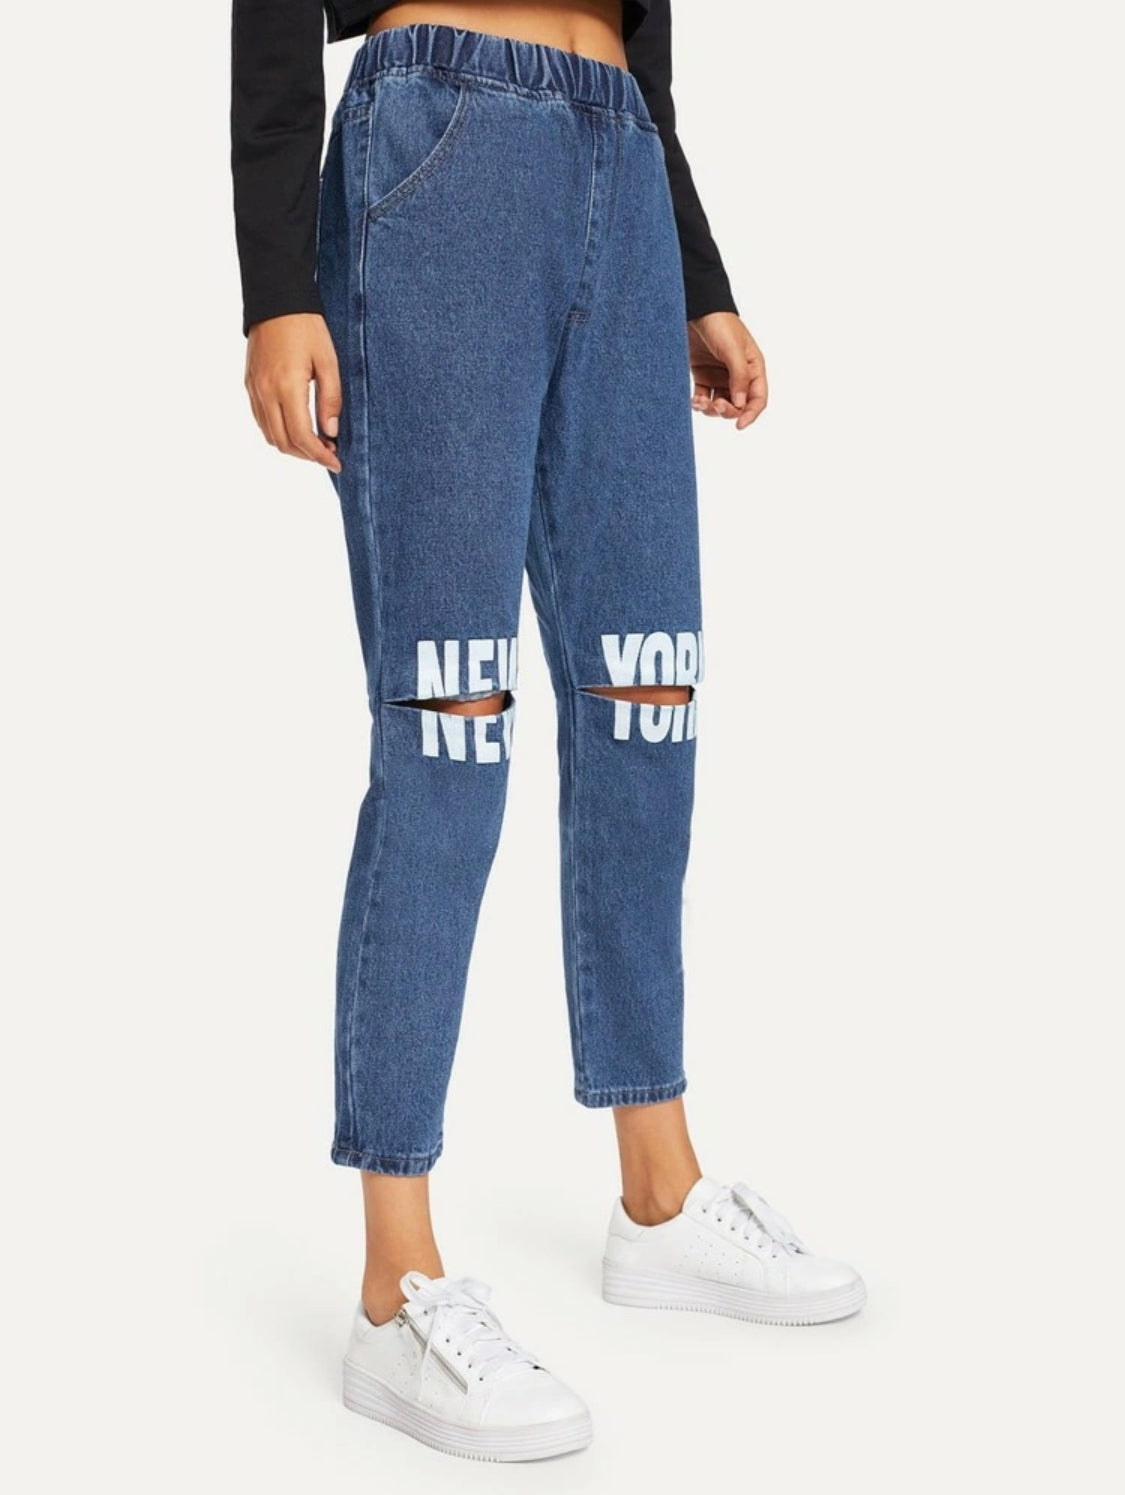 Letter Print Ripped Jeans